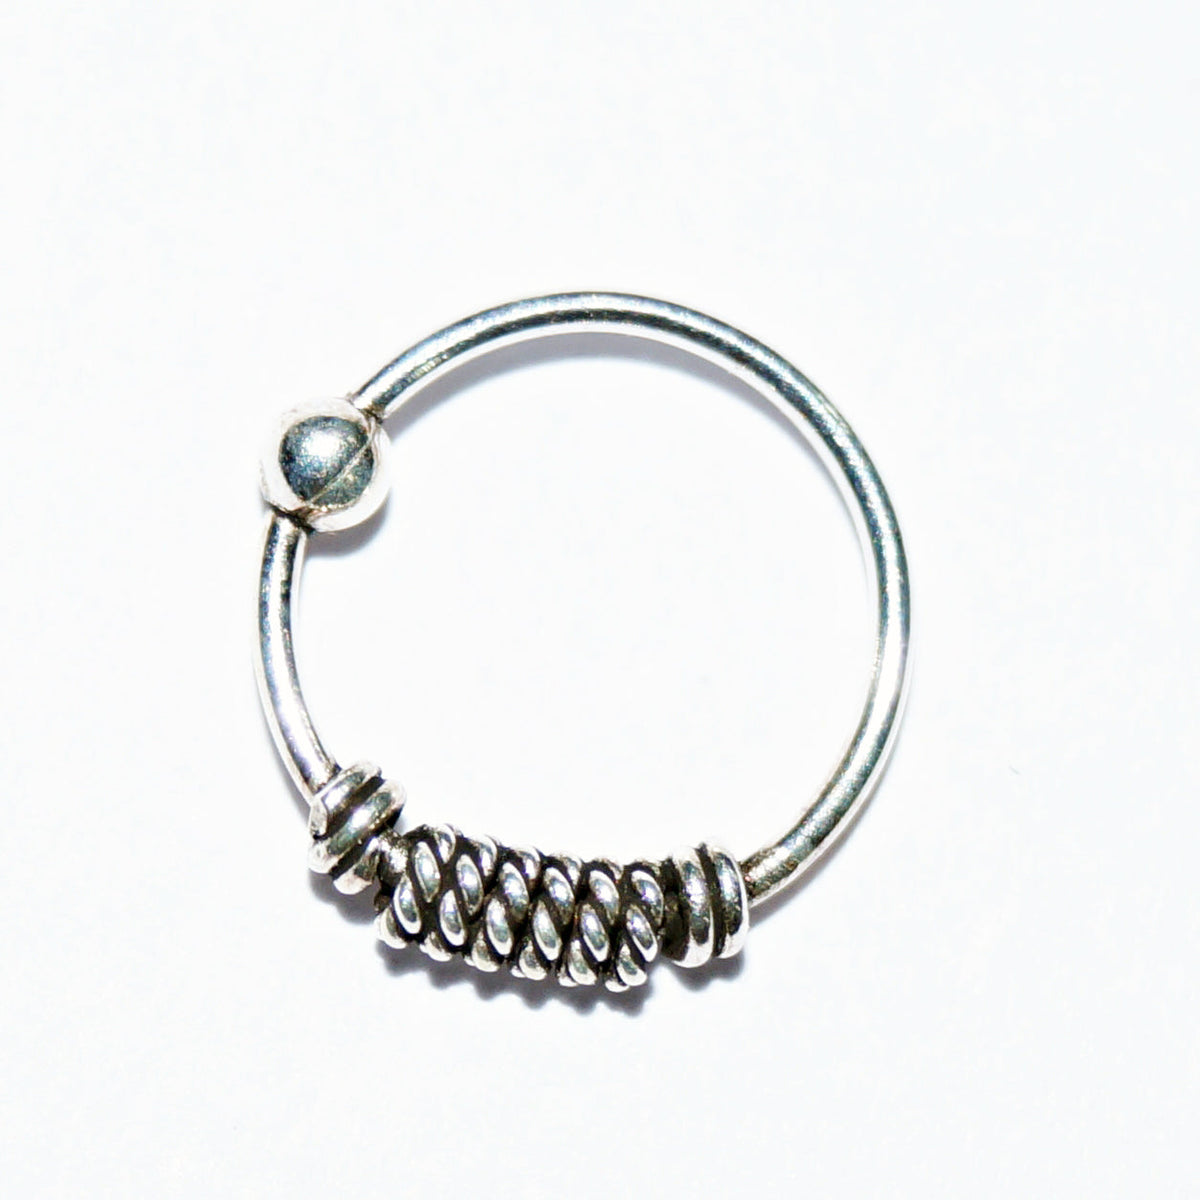 Lasting Spring Bead Nose Ring